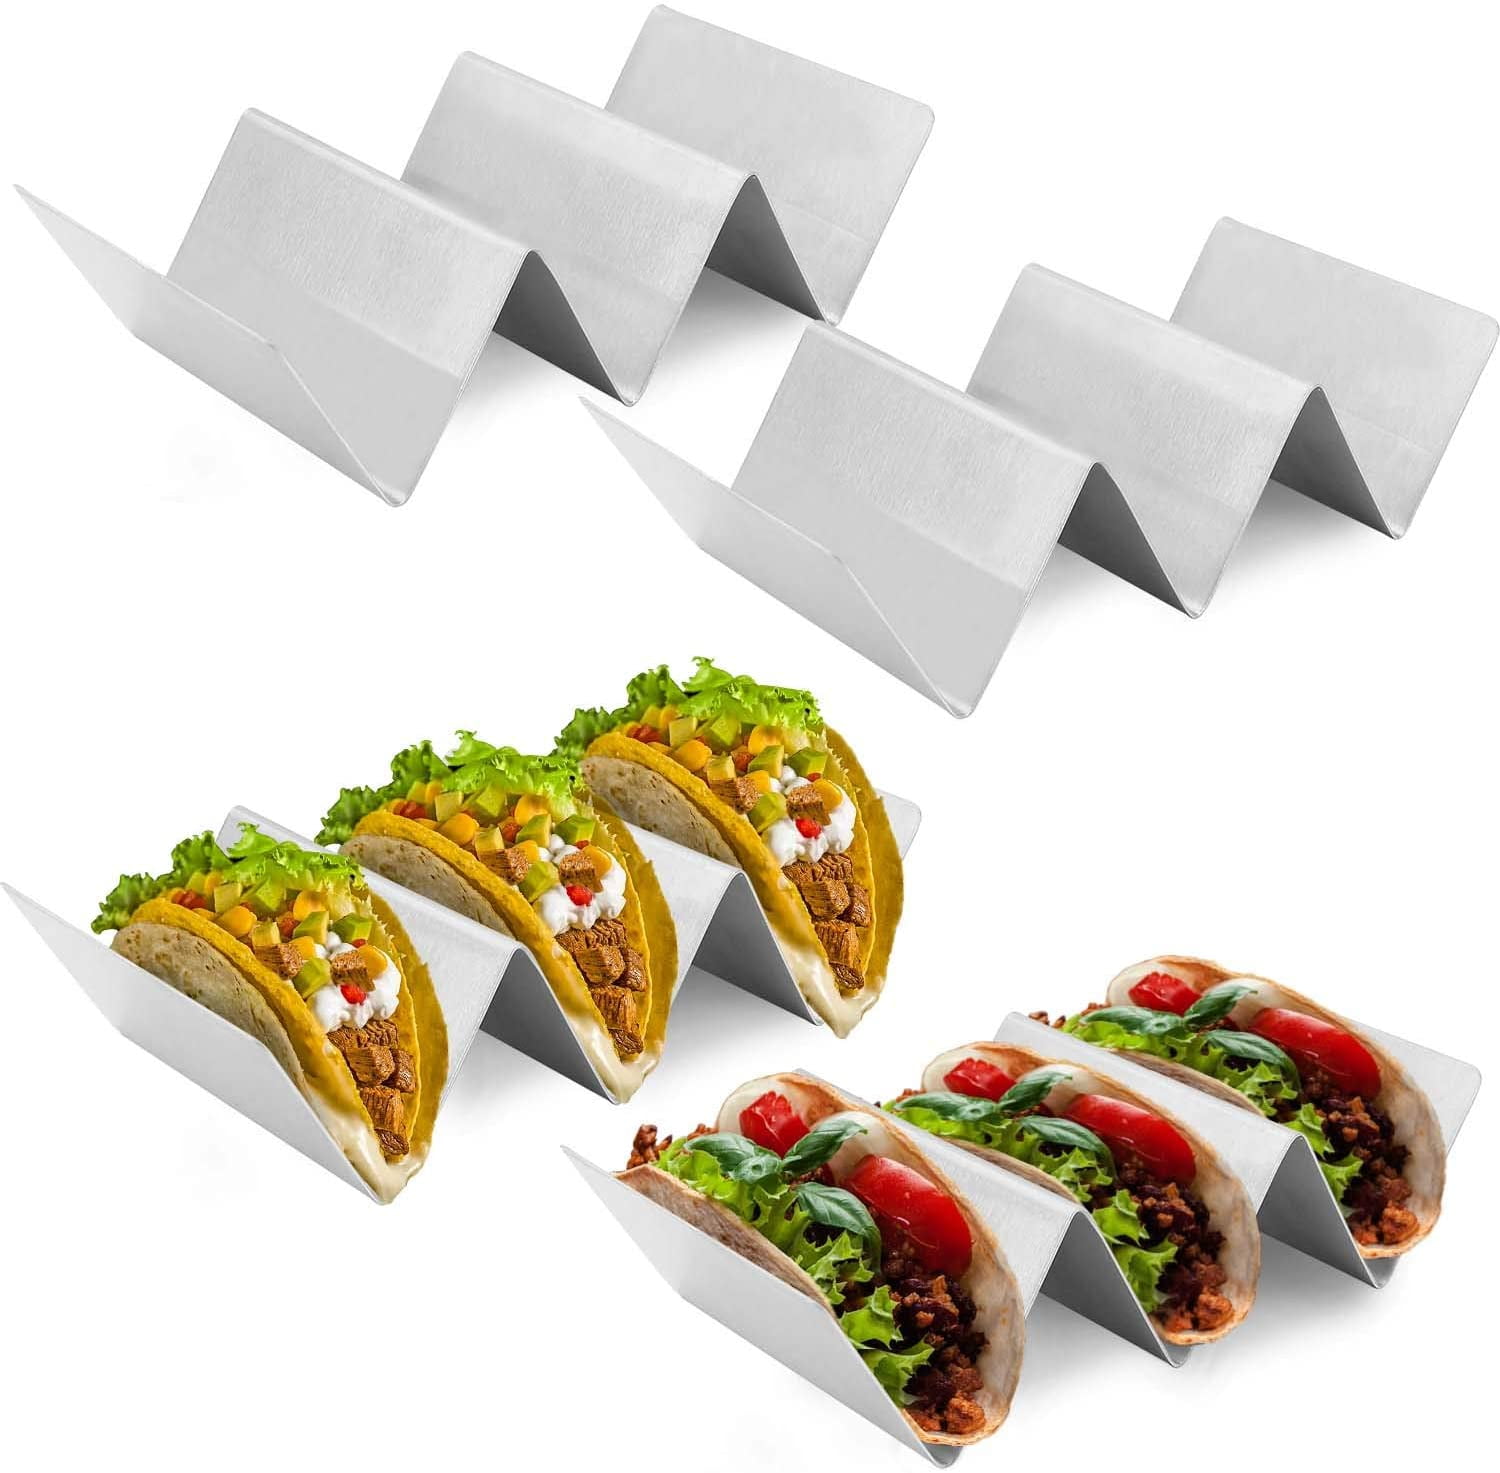 Set of 2 Stainless Steel Taco Holder,Taco Stand,Holds 3 or 4 Hard Soft Shell Tacos,Dishwasher Safe Taco Rack,Truck Tray Style for Baking 